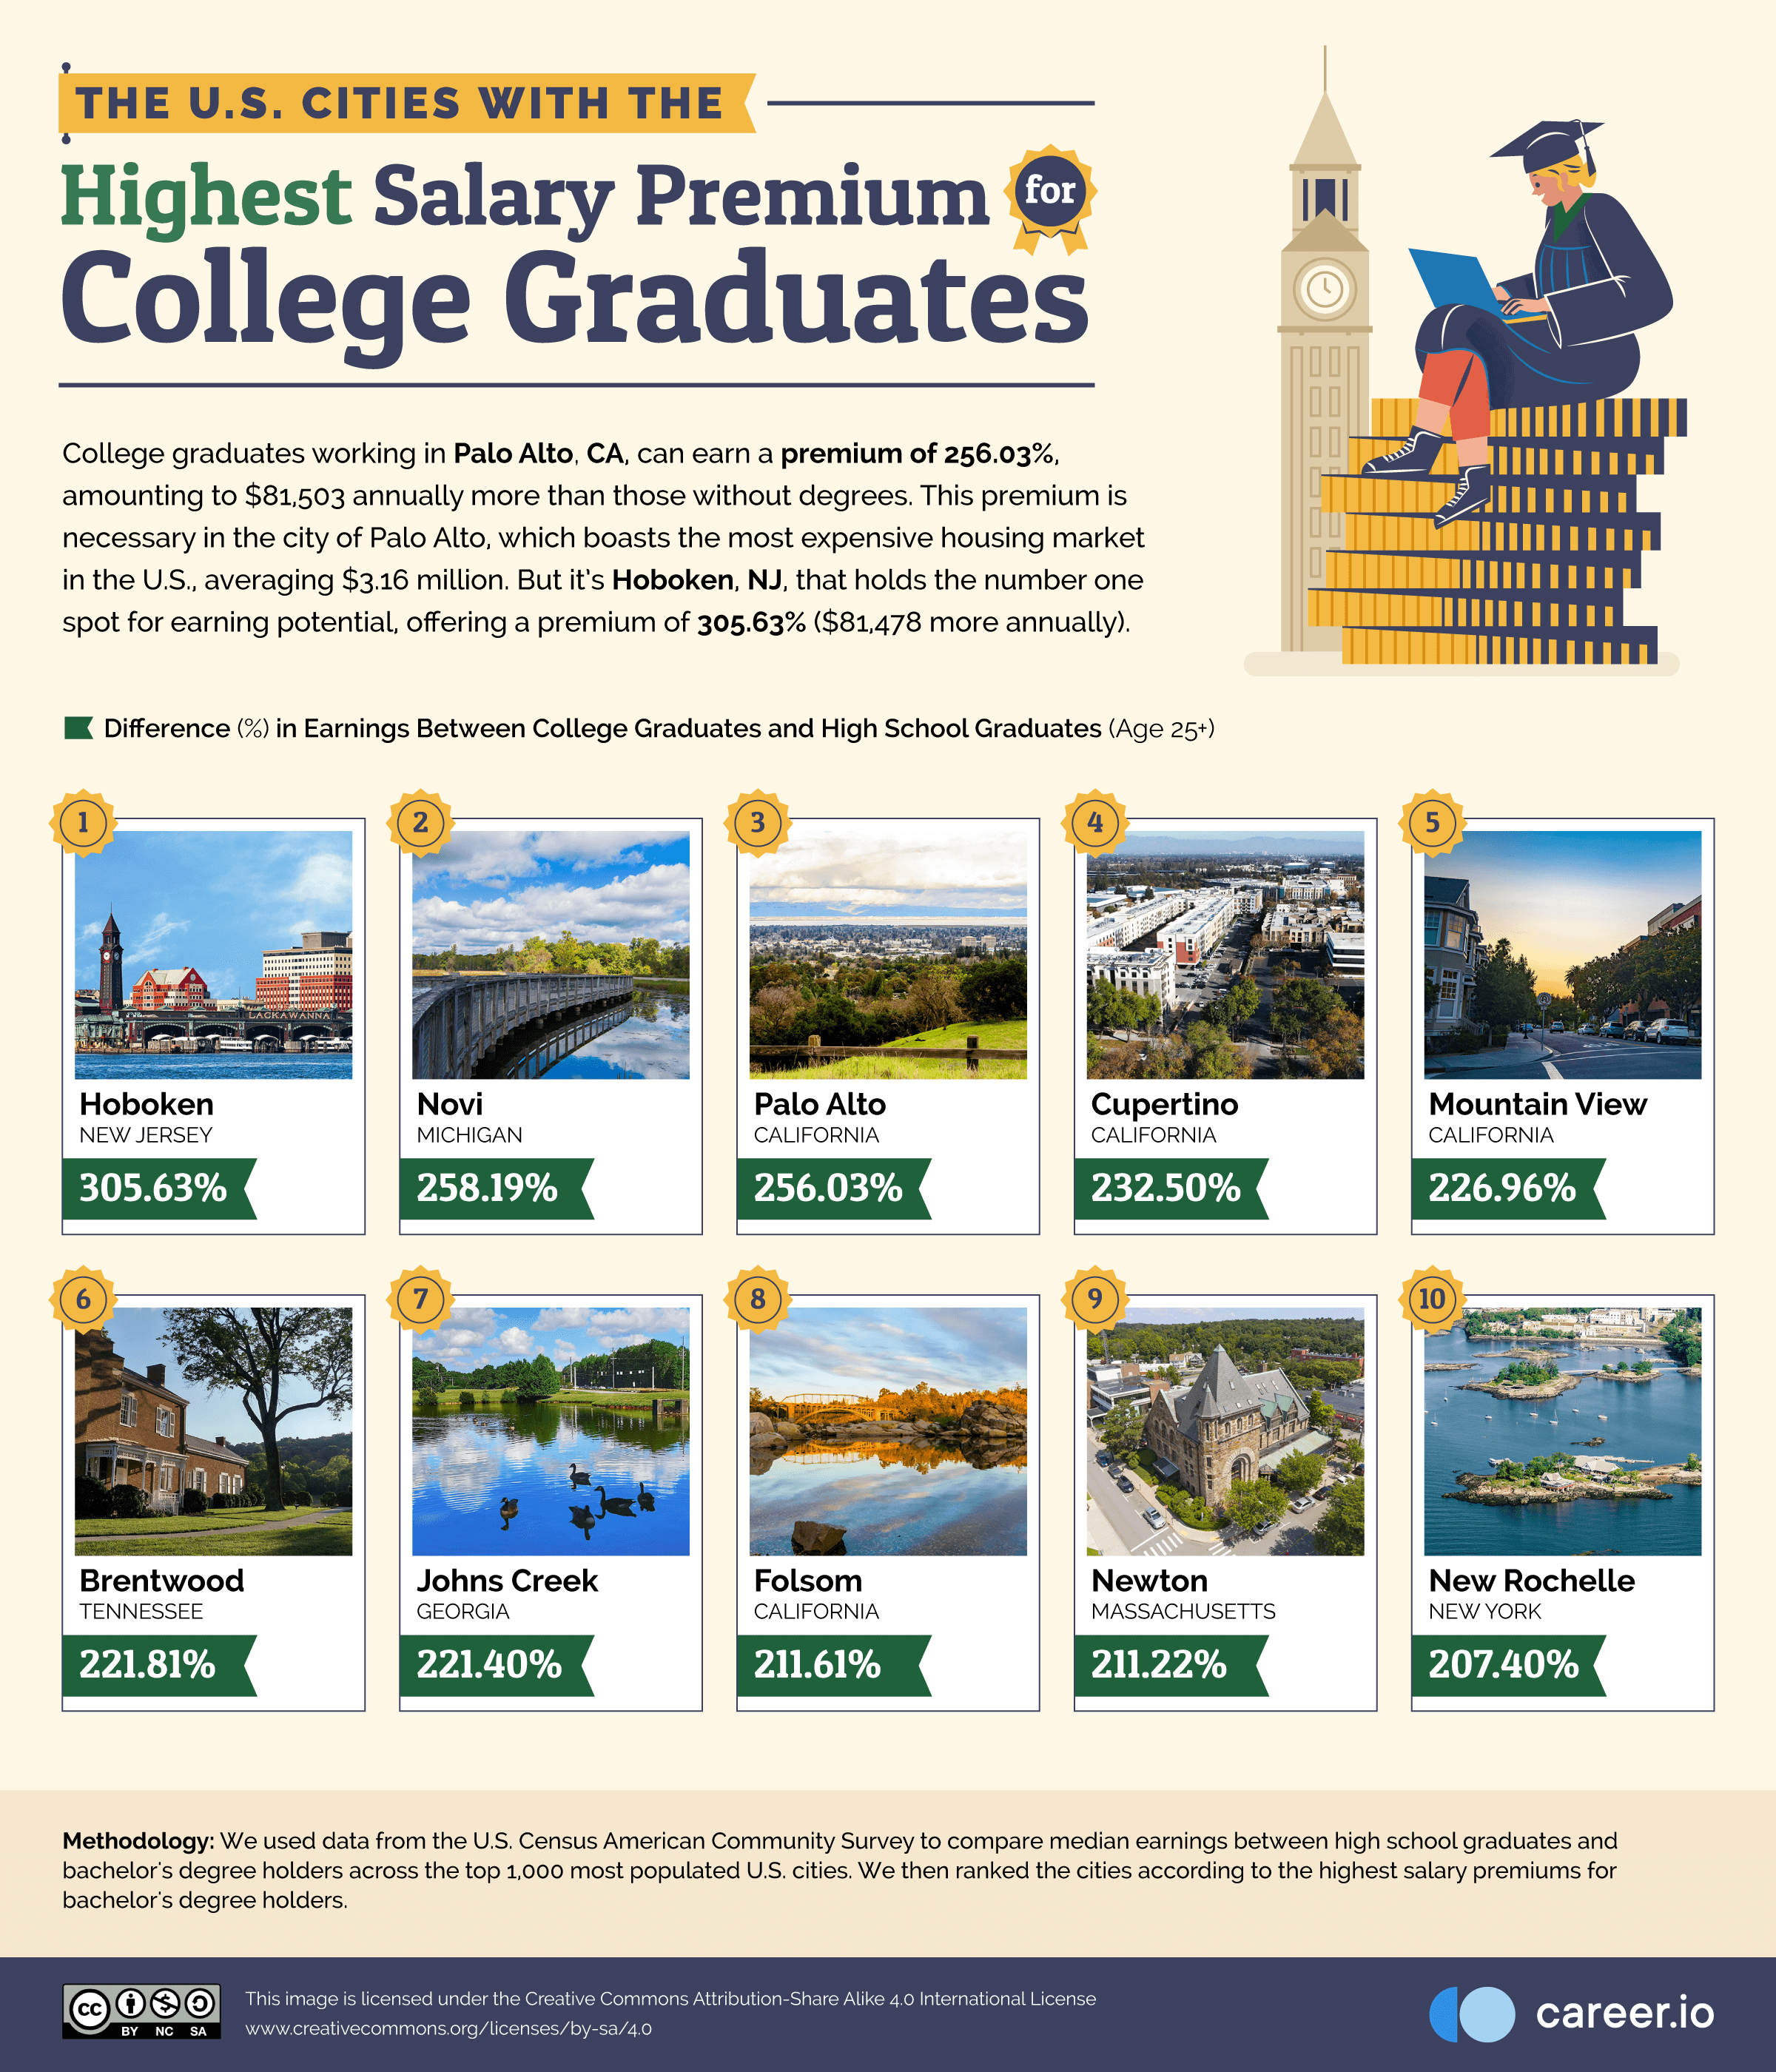 04 The-US-Cities-With-the-Highest-Salary-Premium-for-College-Graduates